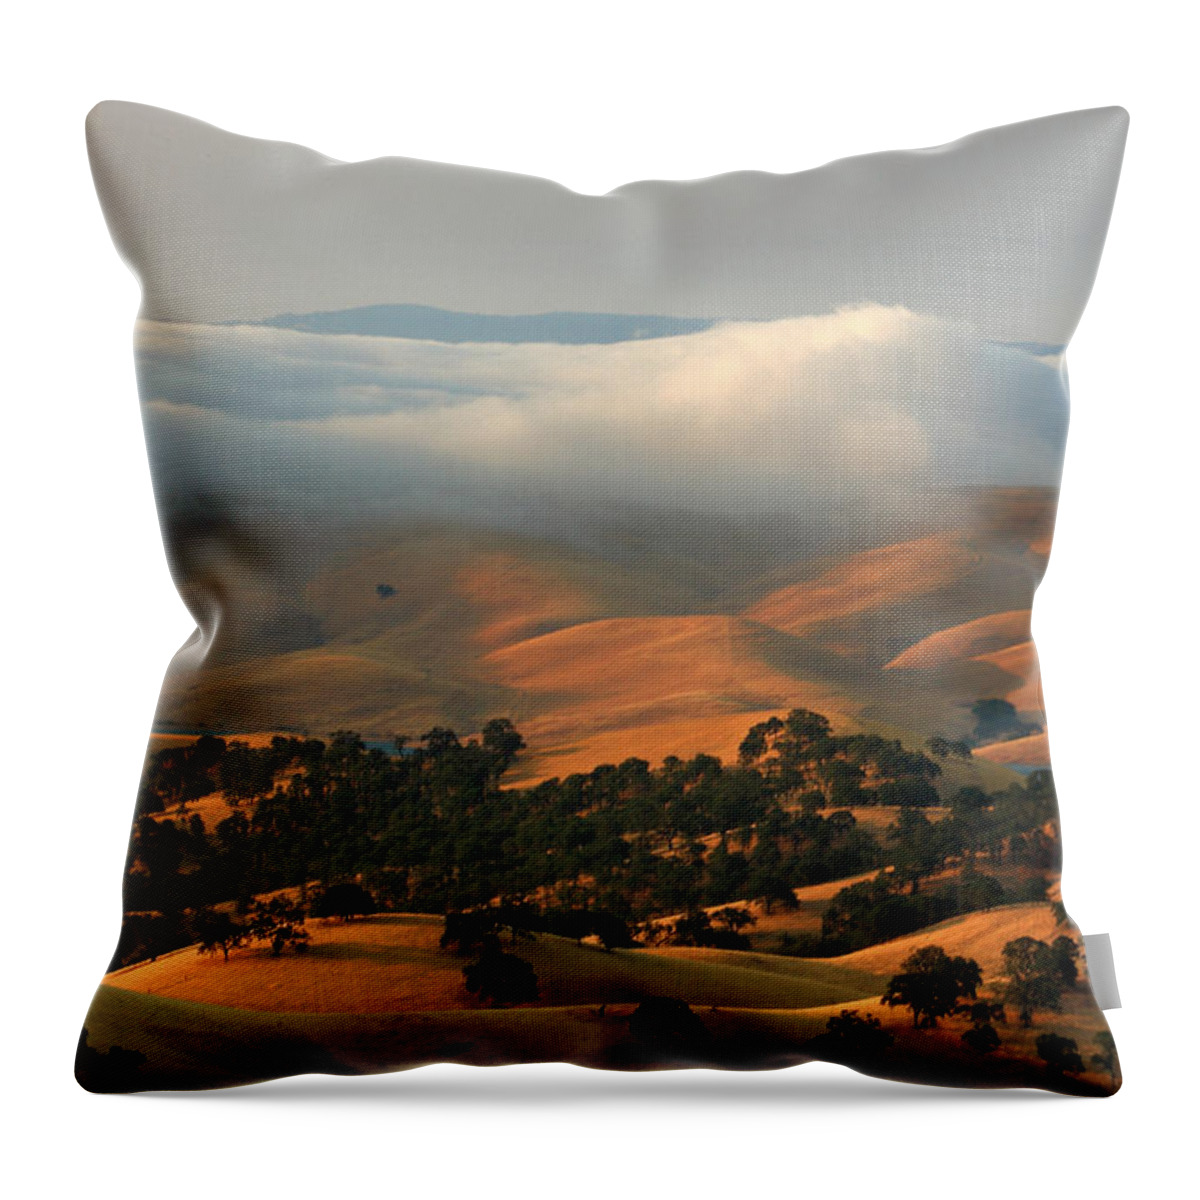 Landscape Throw Pillow featuring the photograph Low Clouds Over Distant Hills by Marc Crumpler